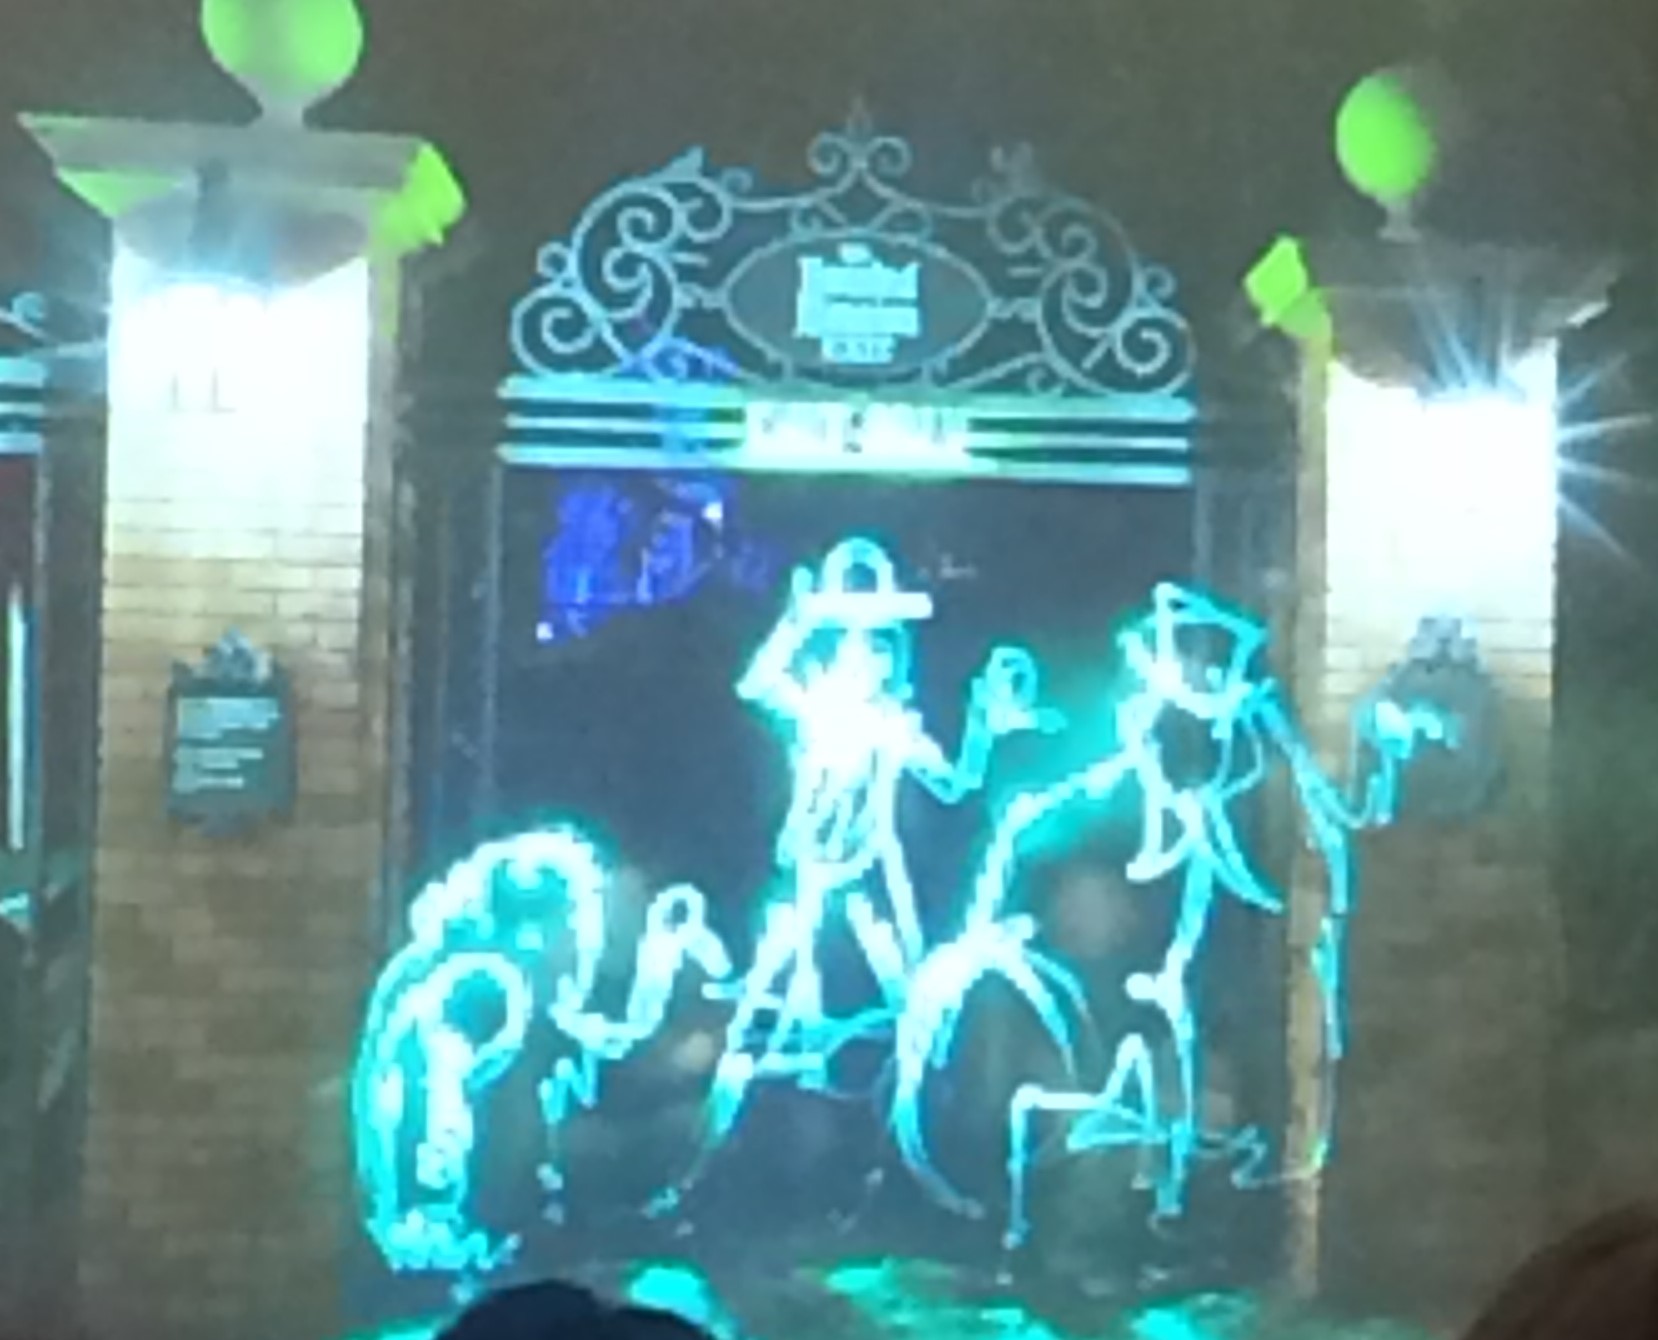 A light painting of the Hitchhiking Ghosts in front of The Haunted Mansion.